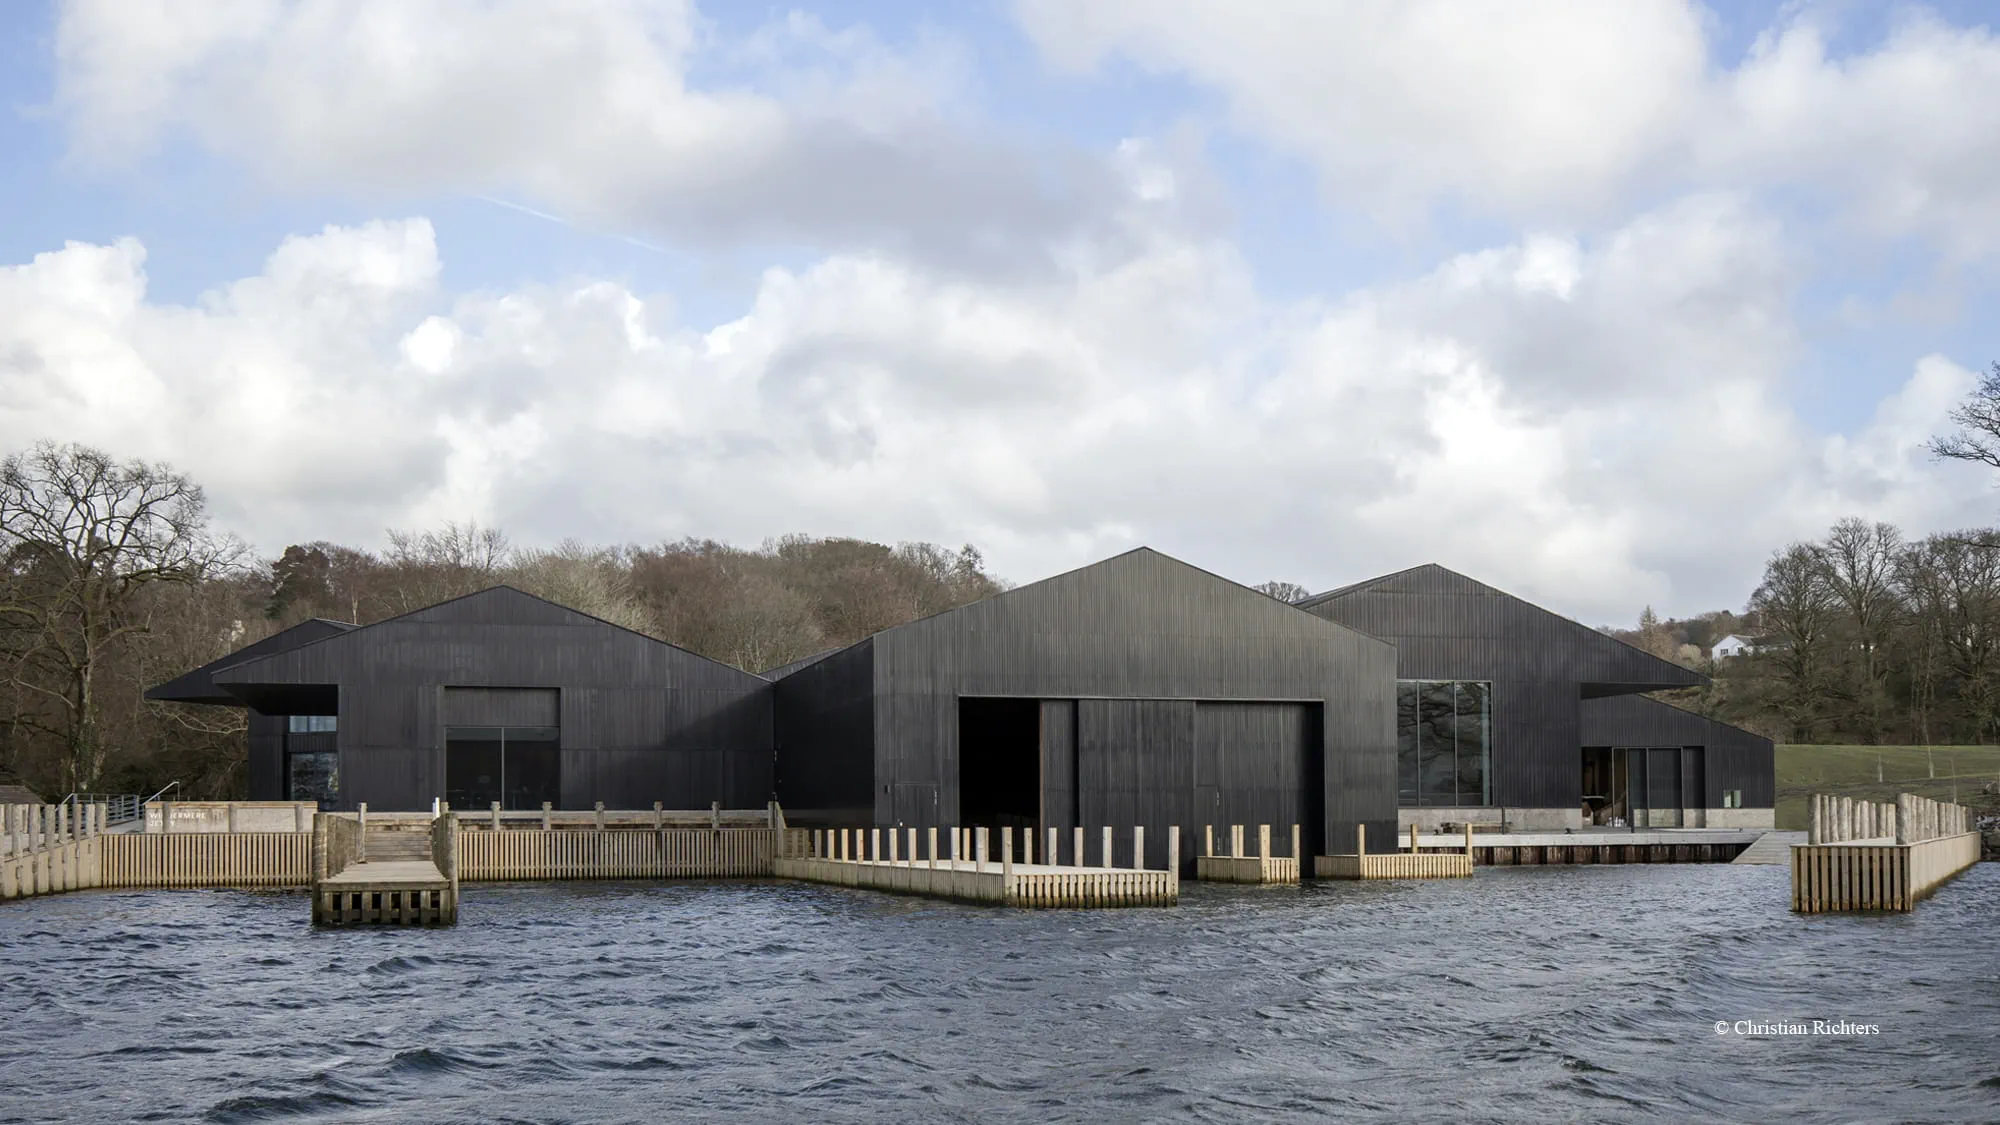 Windermere Jetty Museum. Credit: Christian Richters